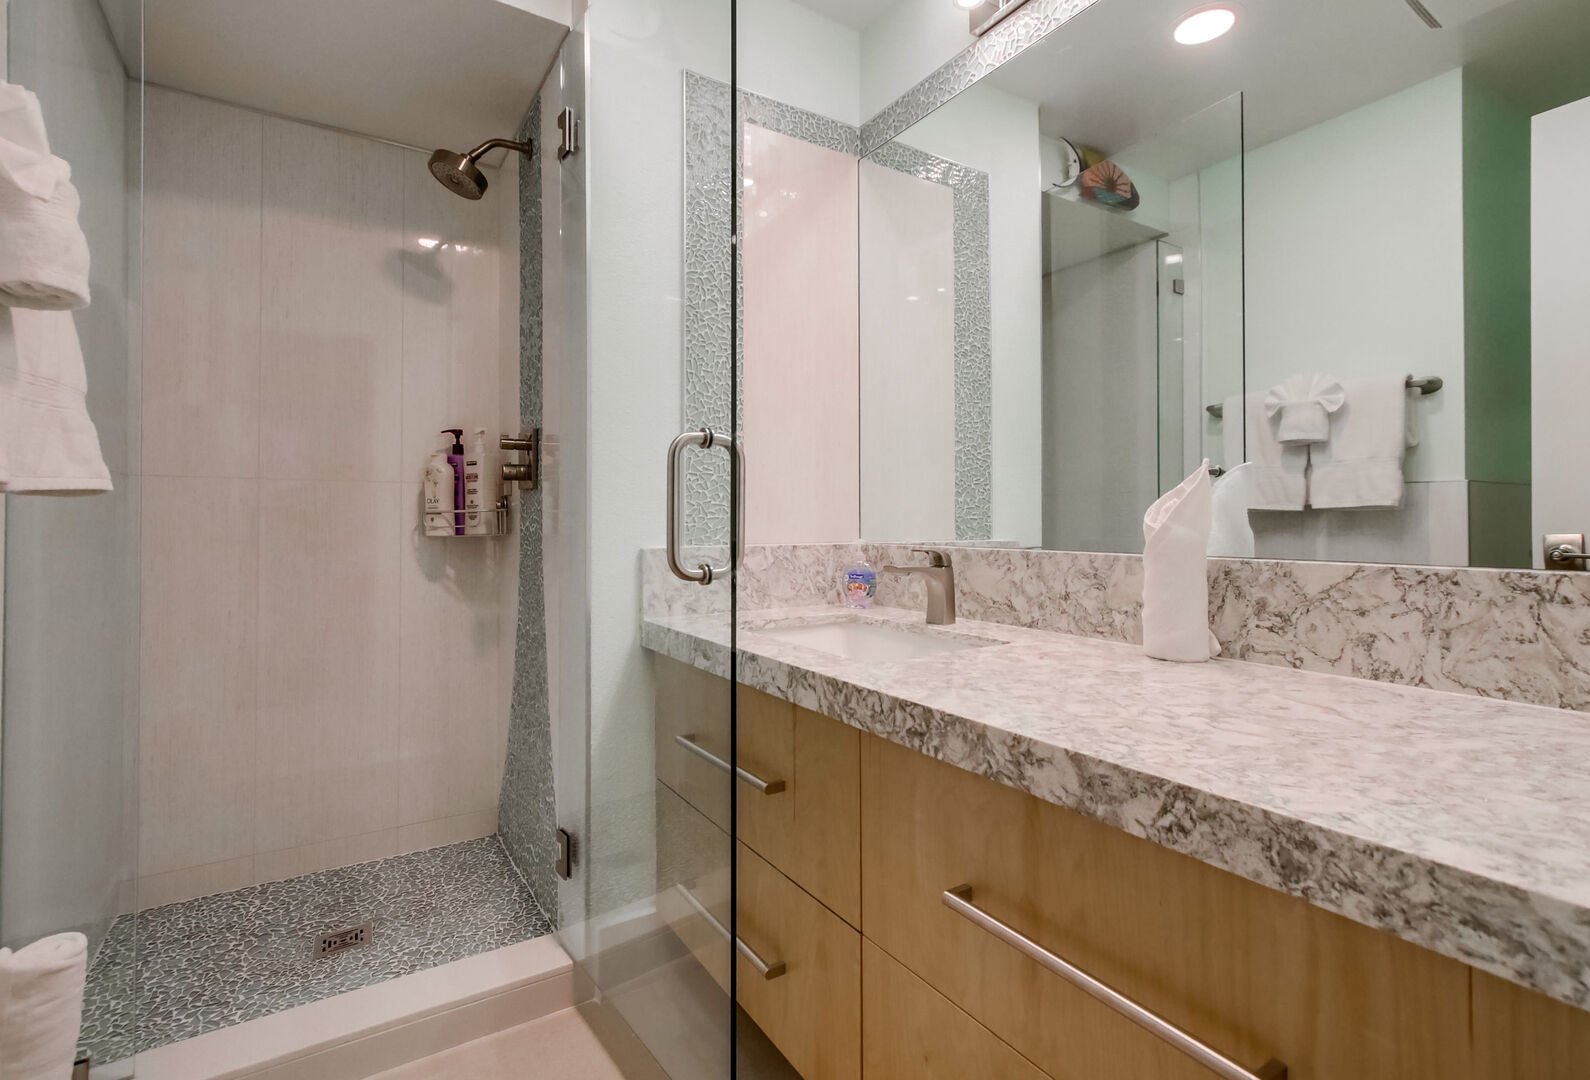 Brand new remodeled full guest bathroom! Walk-in shower (pictured: small step into the shower), large vanity, new light fixtures and countertops